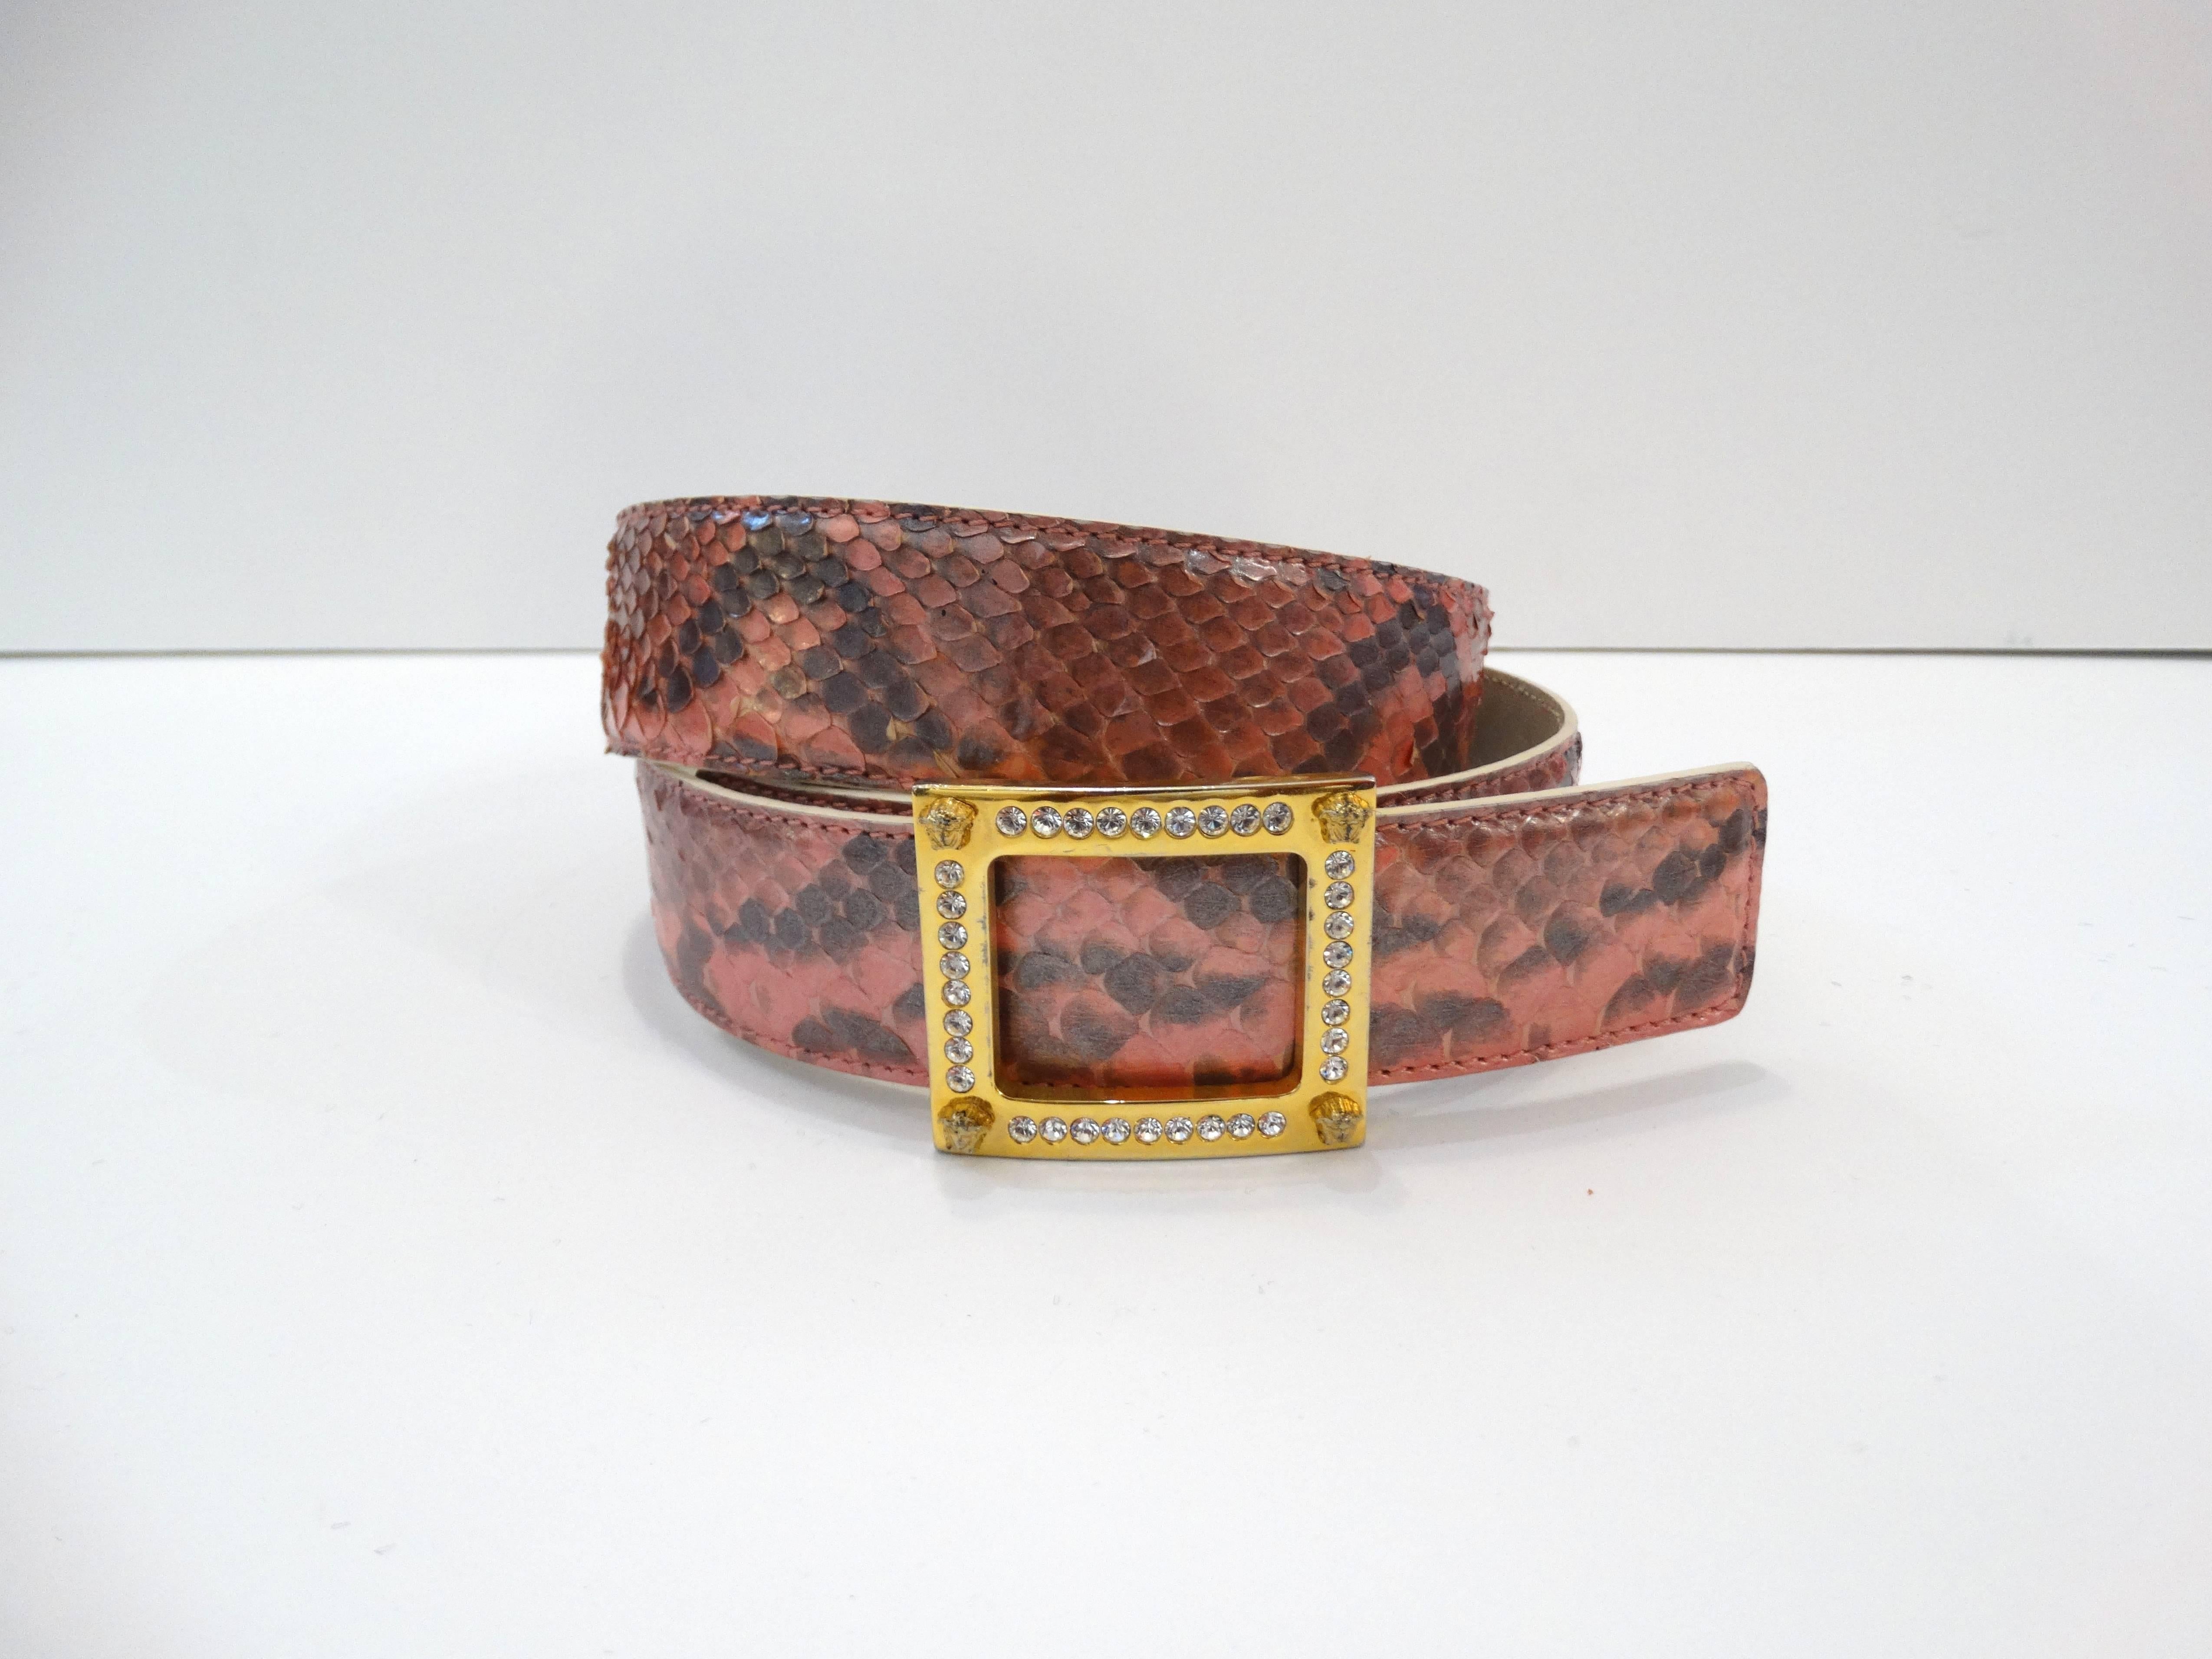 Adorable 1990s Gianni Versace pink snakeskin belt! Gold metal square belt bucket accented with angel heads and crystalline rhinestones. Peg closure. Pink and black snakeskin material backed by creamy white leather. Some marks on the interior of the